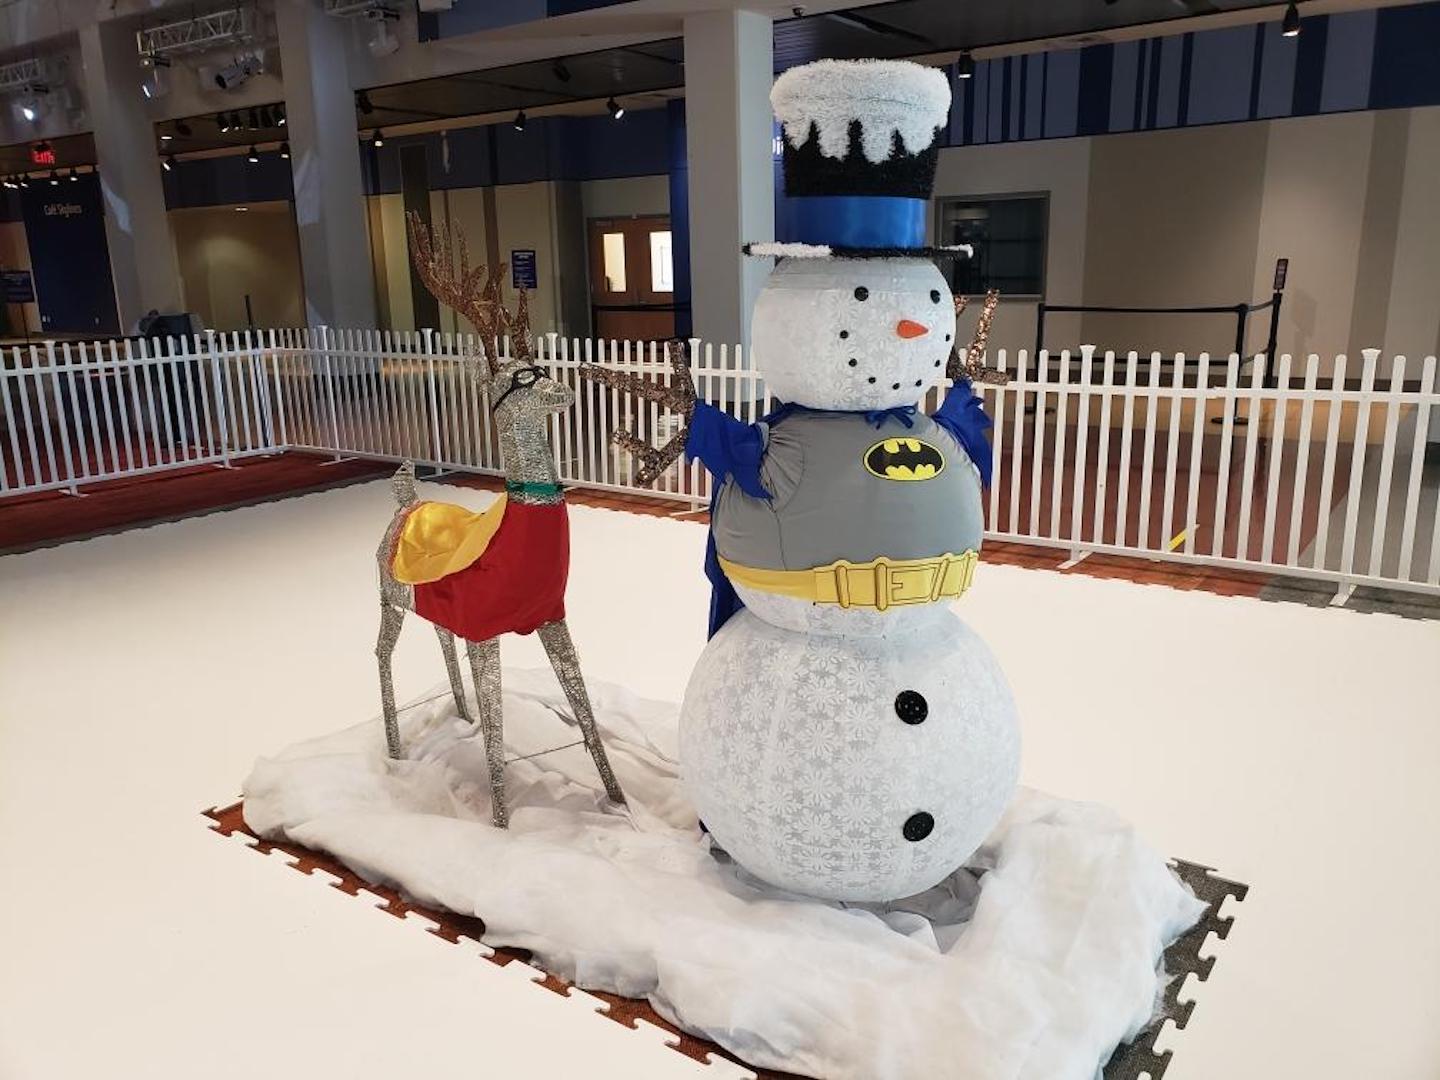 Reindeer and snowman dressed as Batman and Robin in the Sock Skating Rink